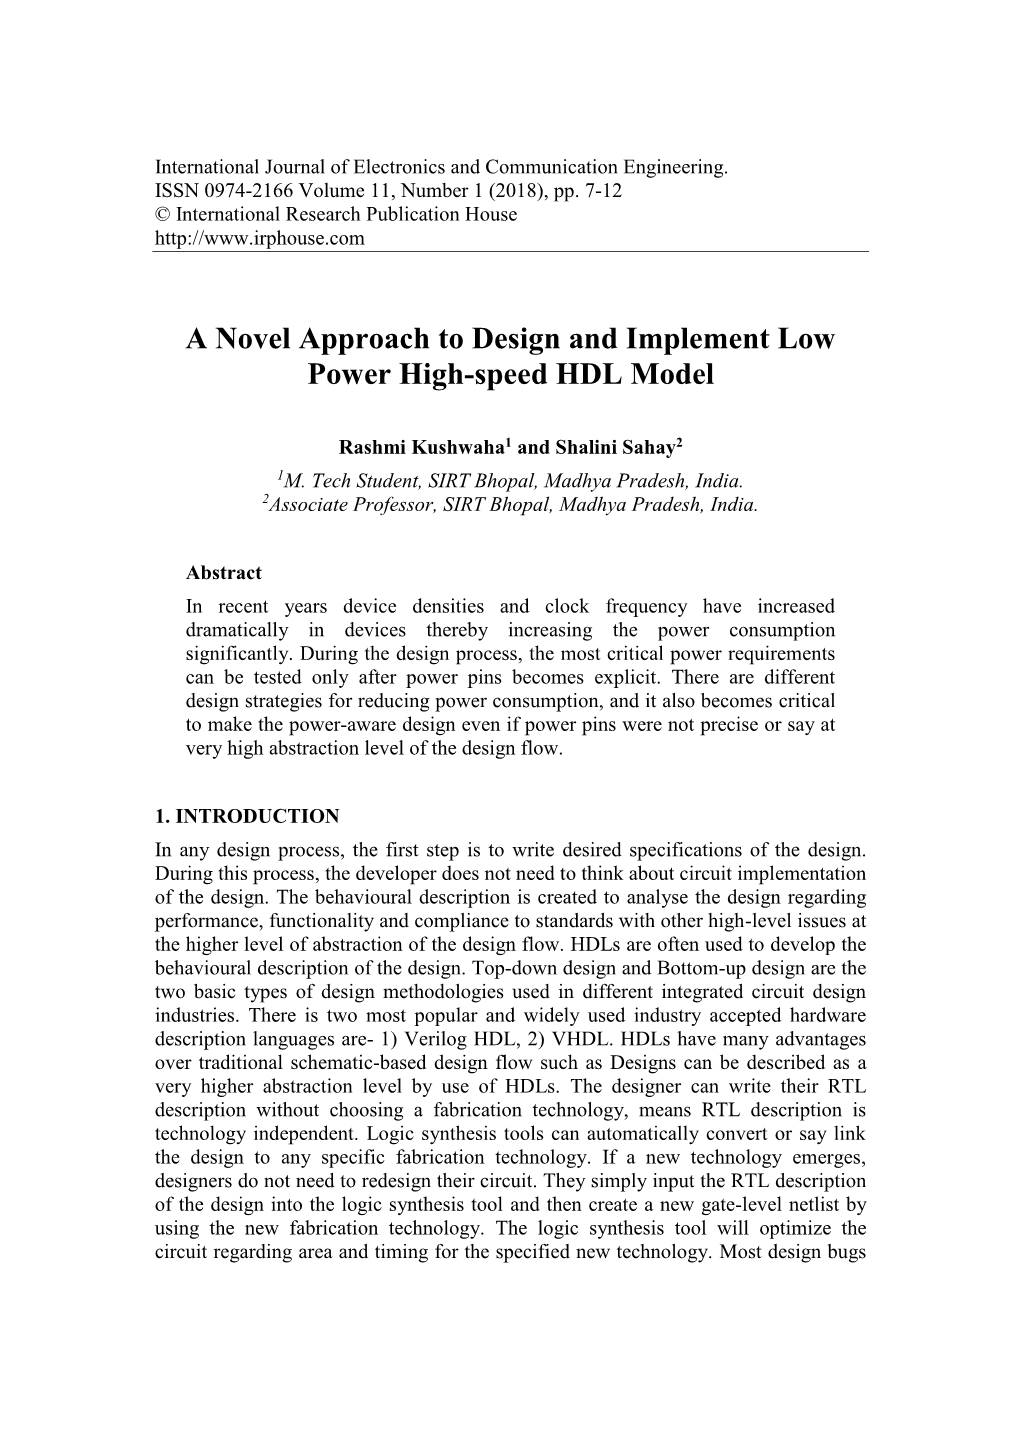 A Novel Approach to Design and Implement Low Power High-Speed HDL Model